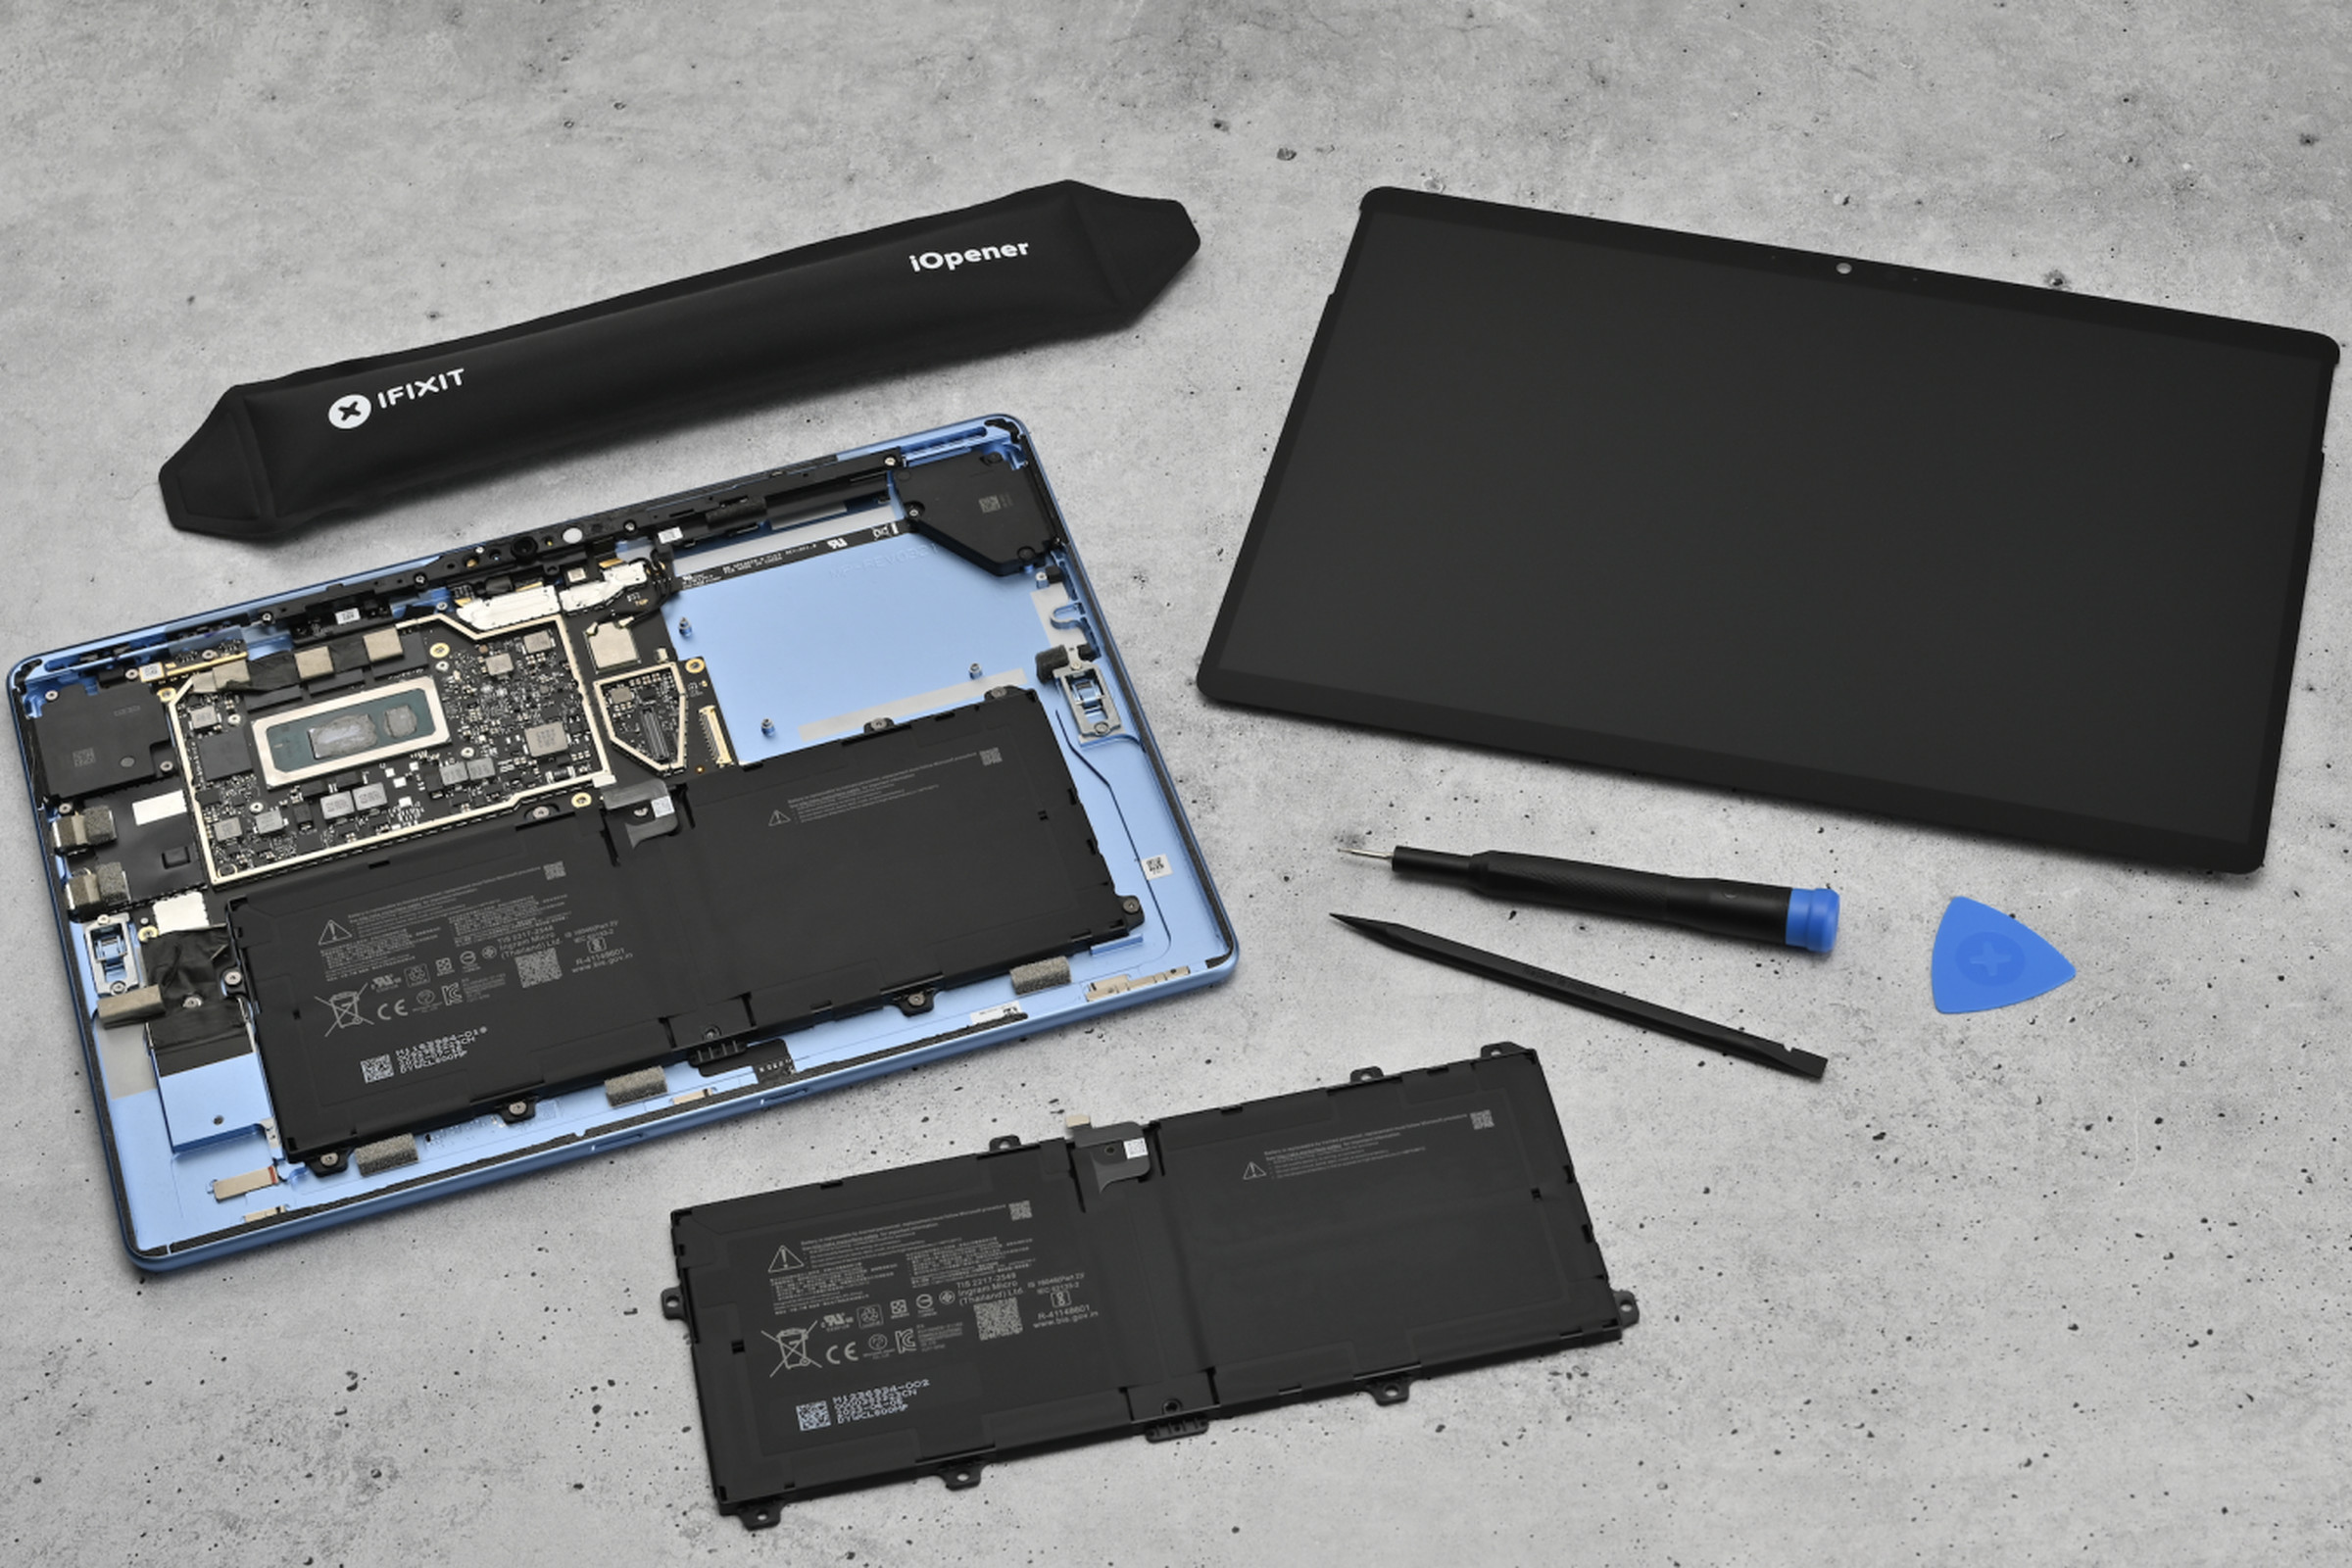 An image showing Microsoft Surface repair parts